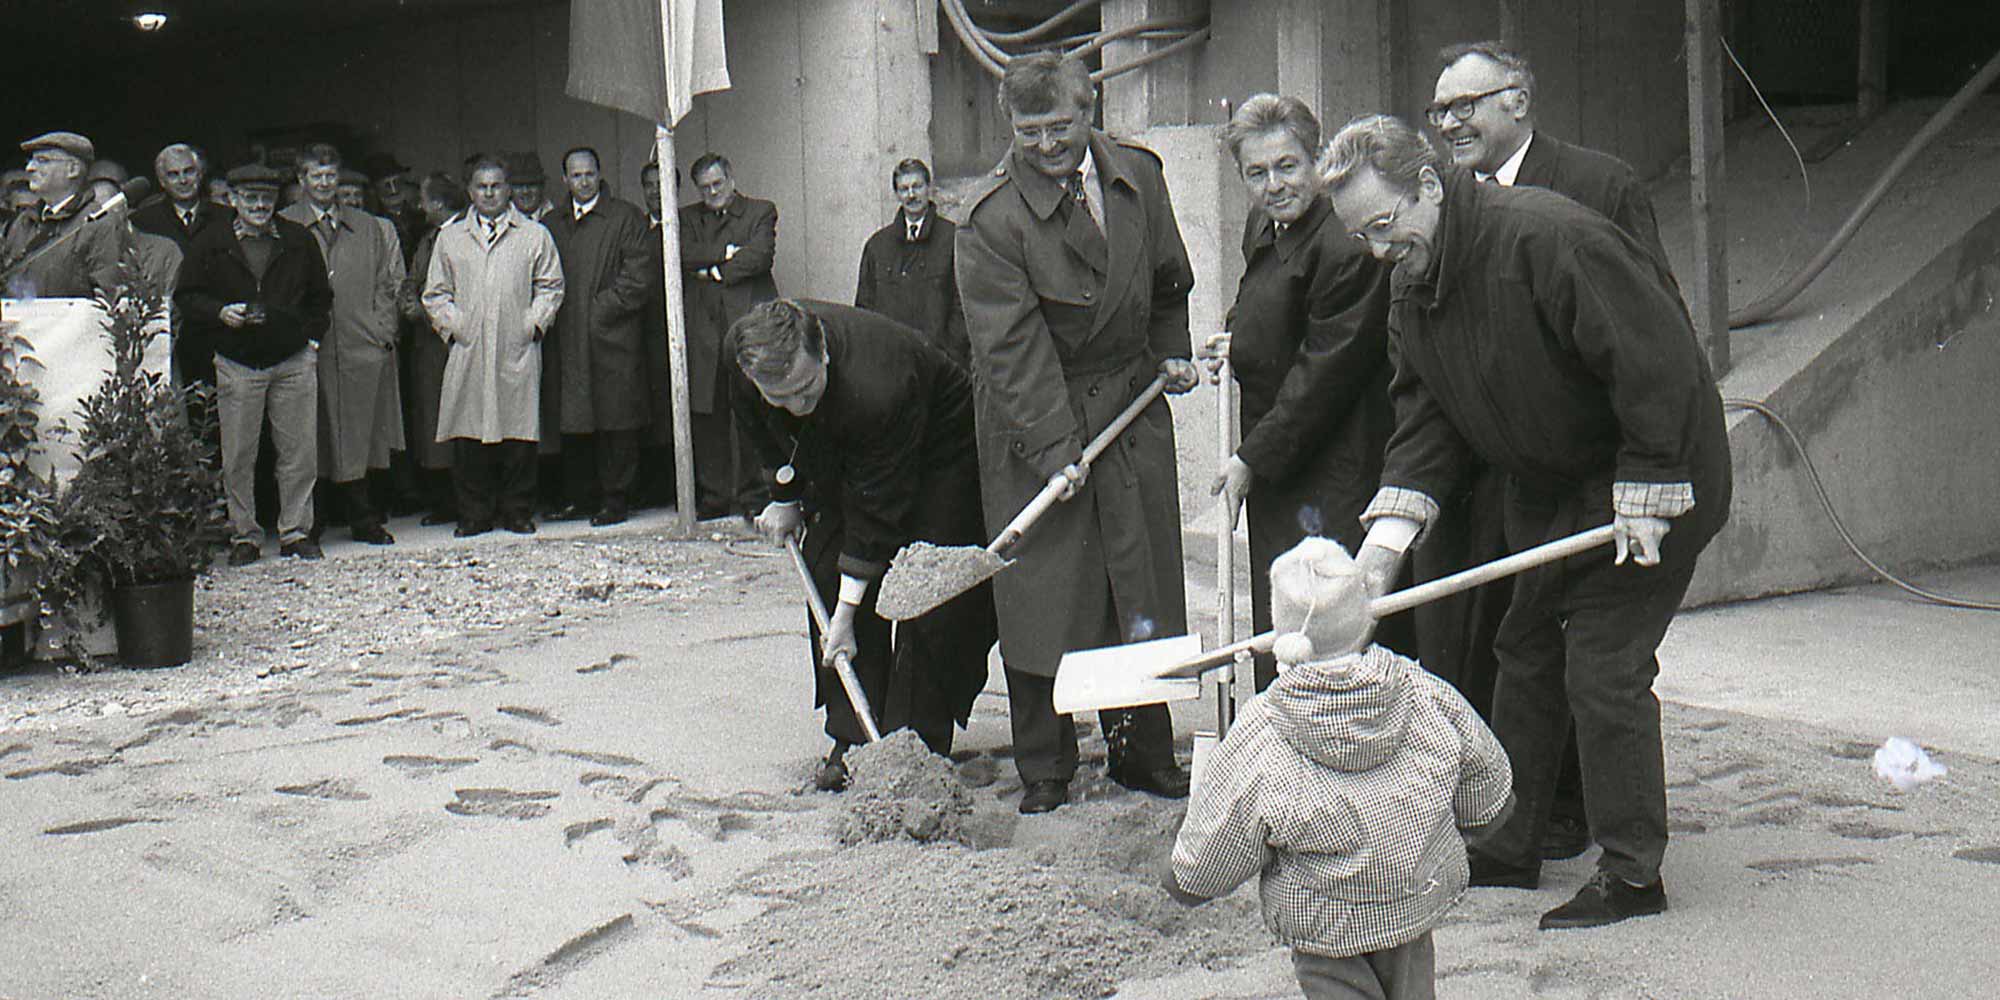 <strong>1994:</strong> Ground-breaking ceremony: Construction work begins on the first Ars Electronica Center in 1994.